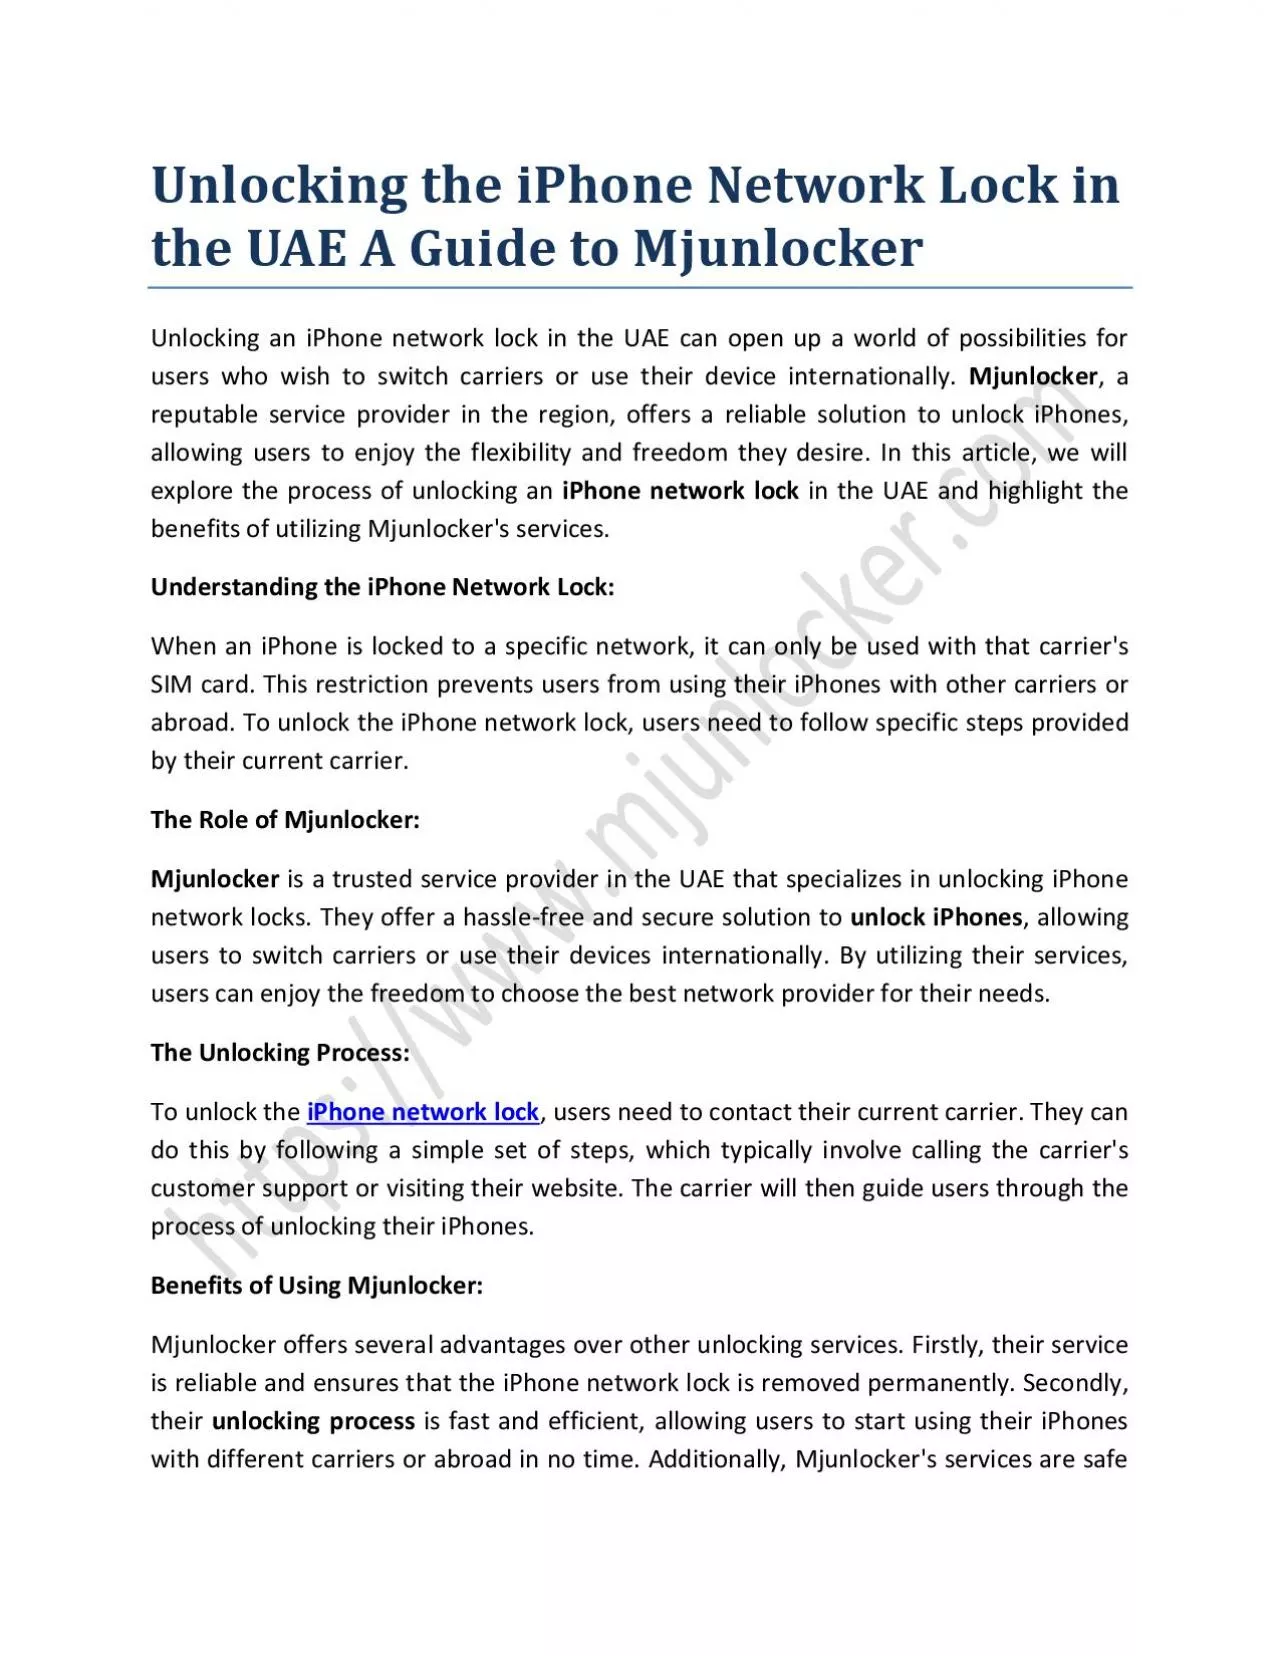 Unlocking the iPhone Network Lock in the UAE A Guide to Mjunlocker